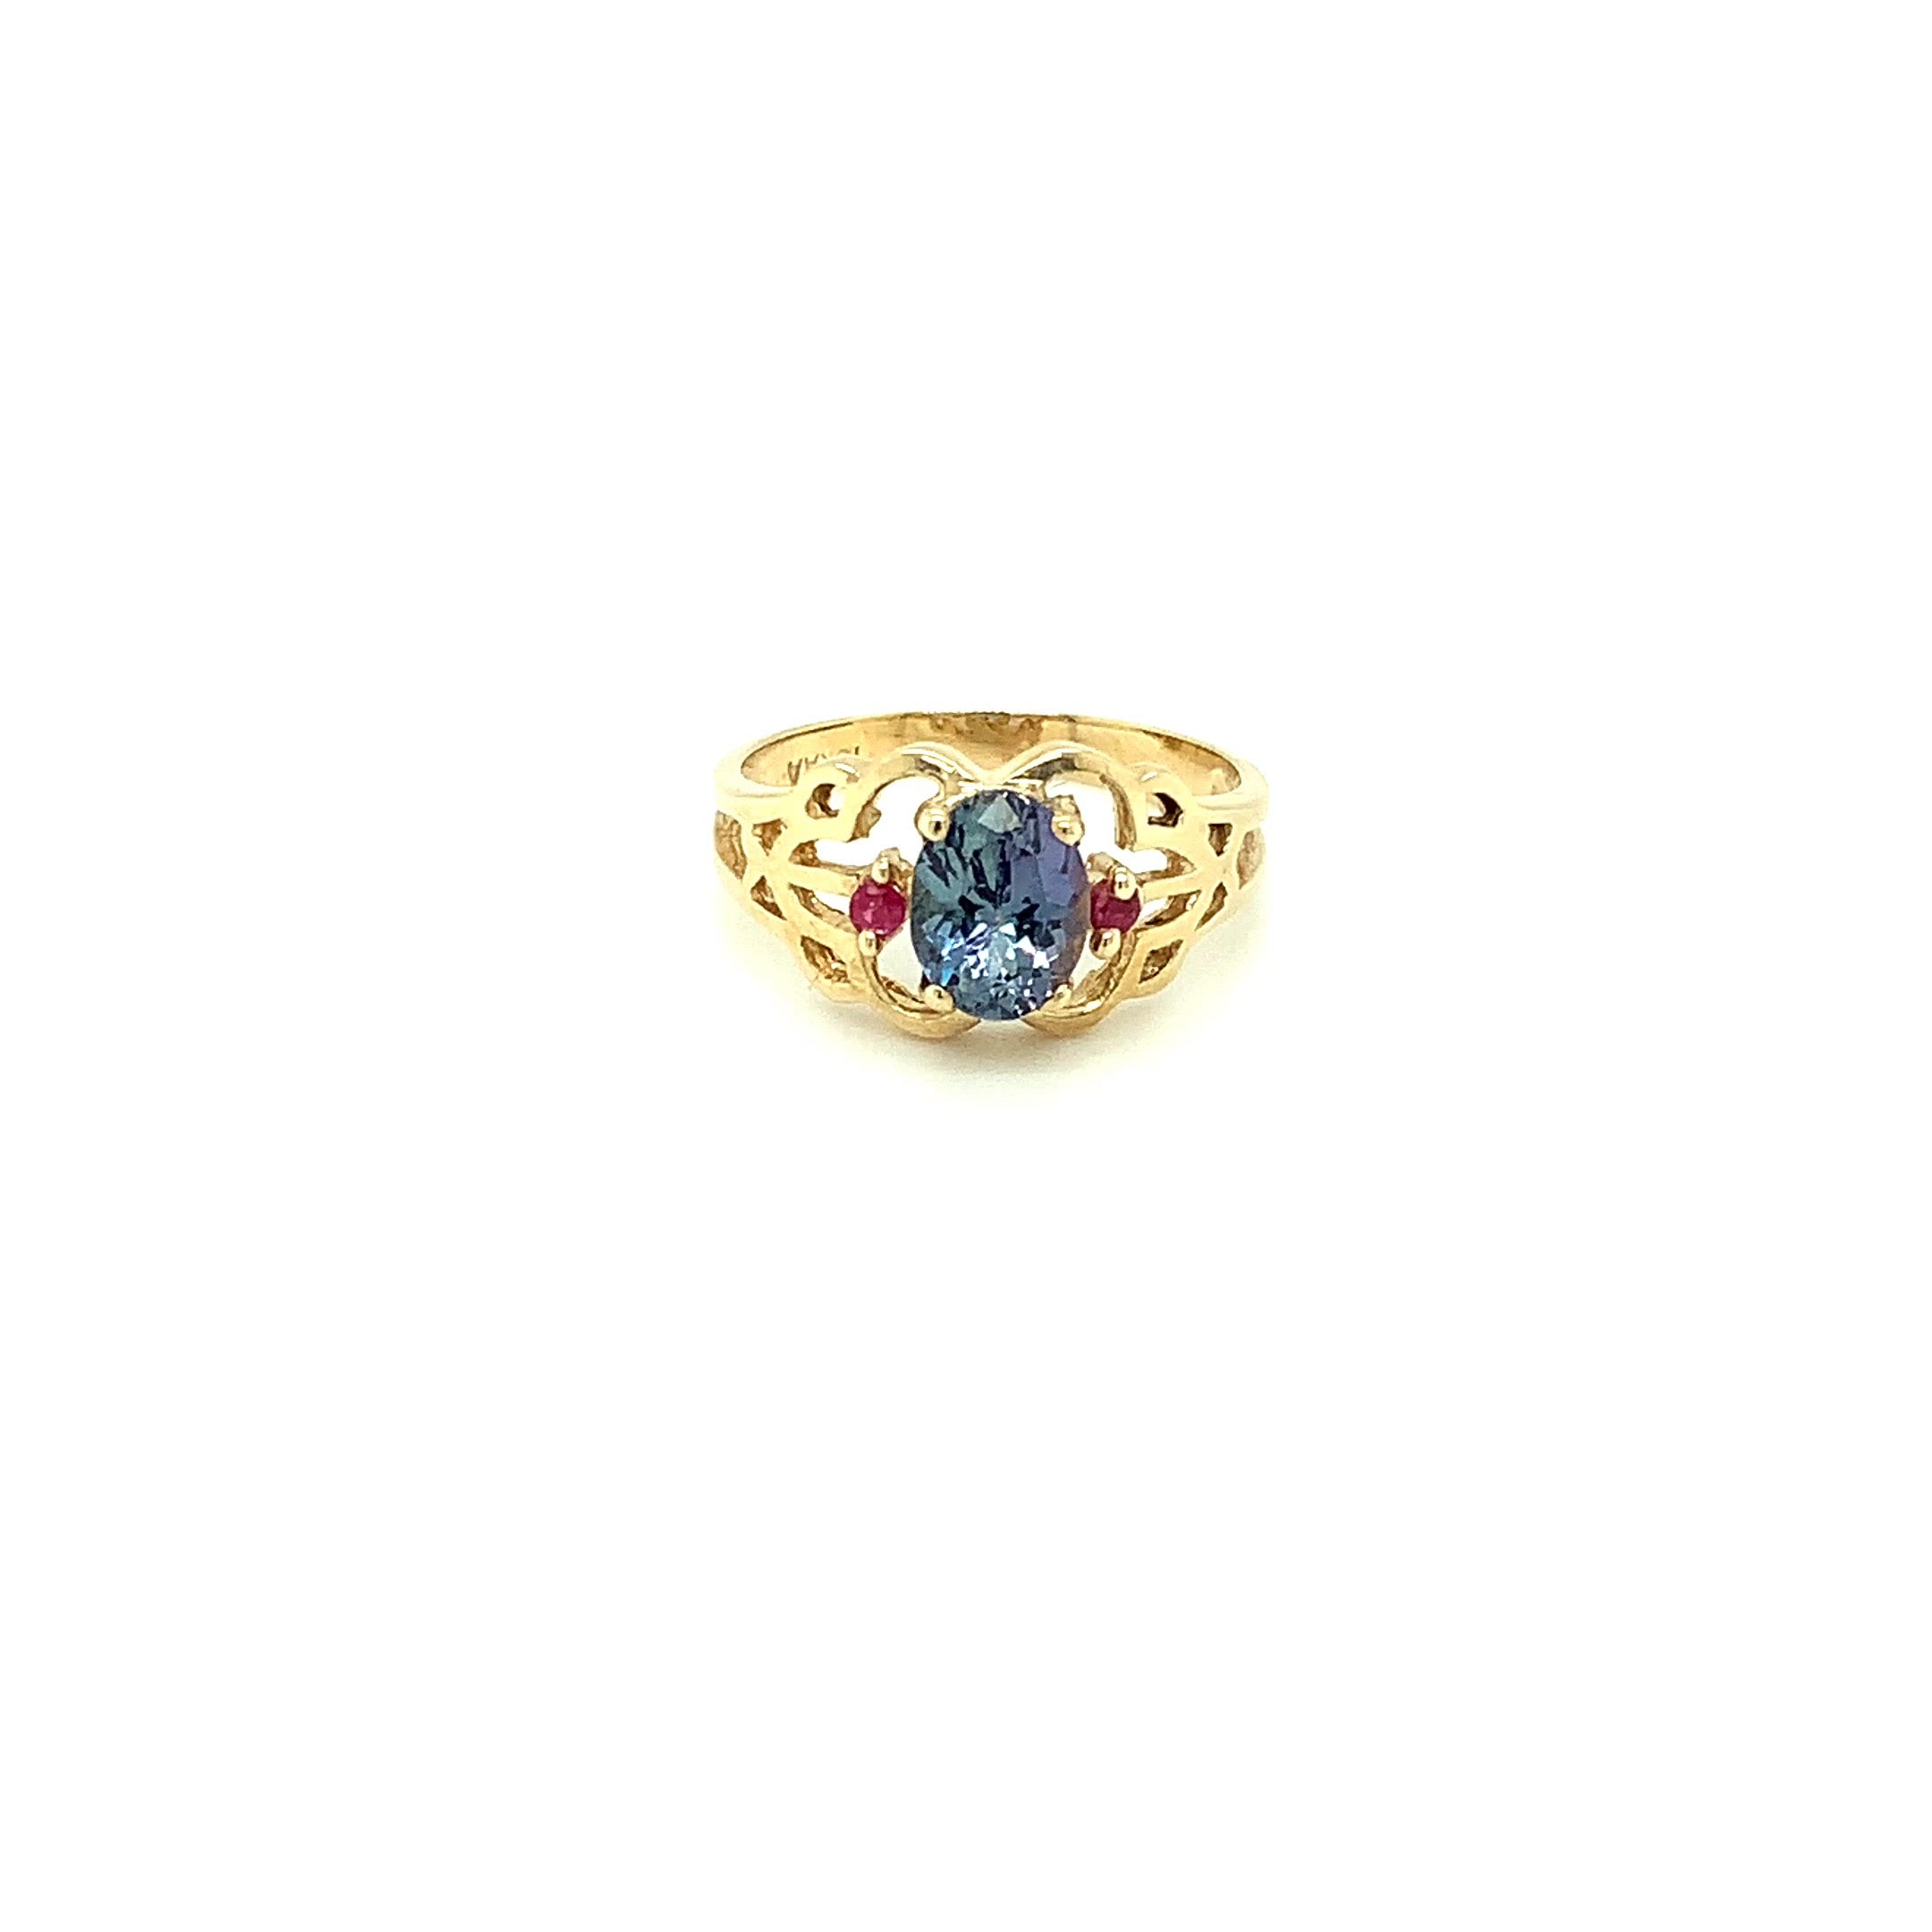 Natural Tanzanite & Ruby Ring 10K Solid Gold 1.42tcw Statement Ring Vintage Ring Estate Ring Cocktail Ring December Birthstone Ring Jewelry